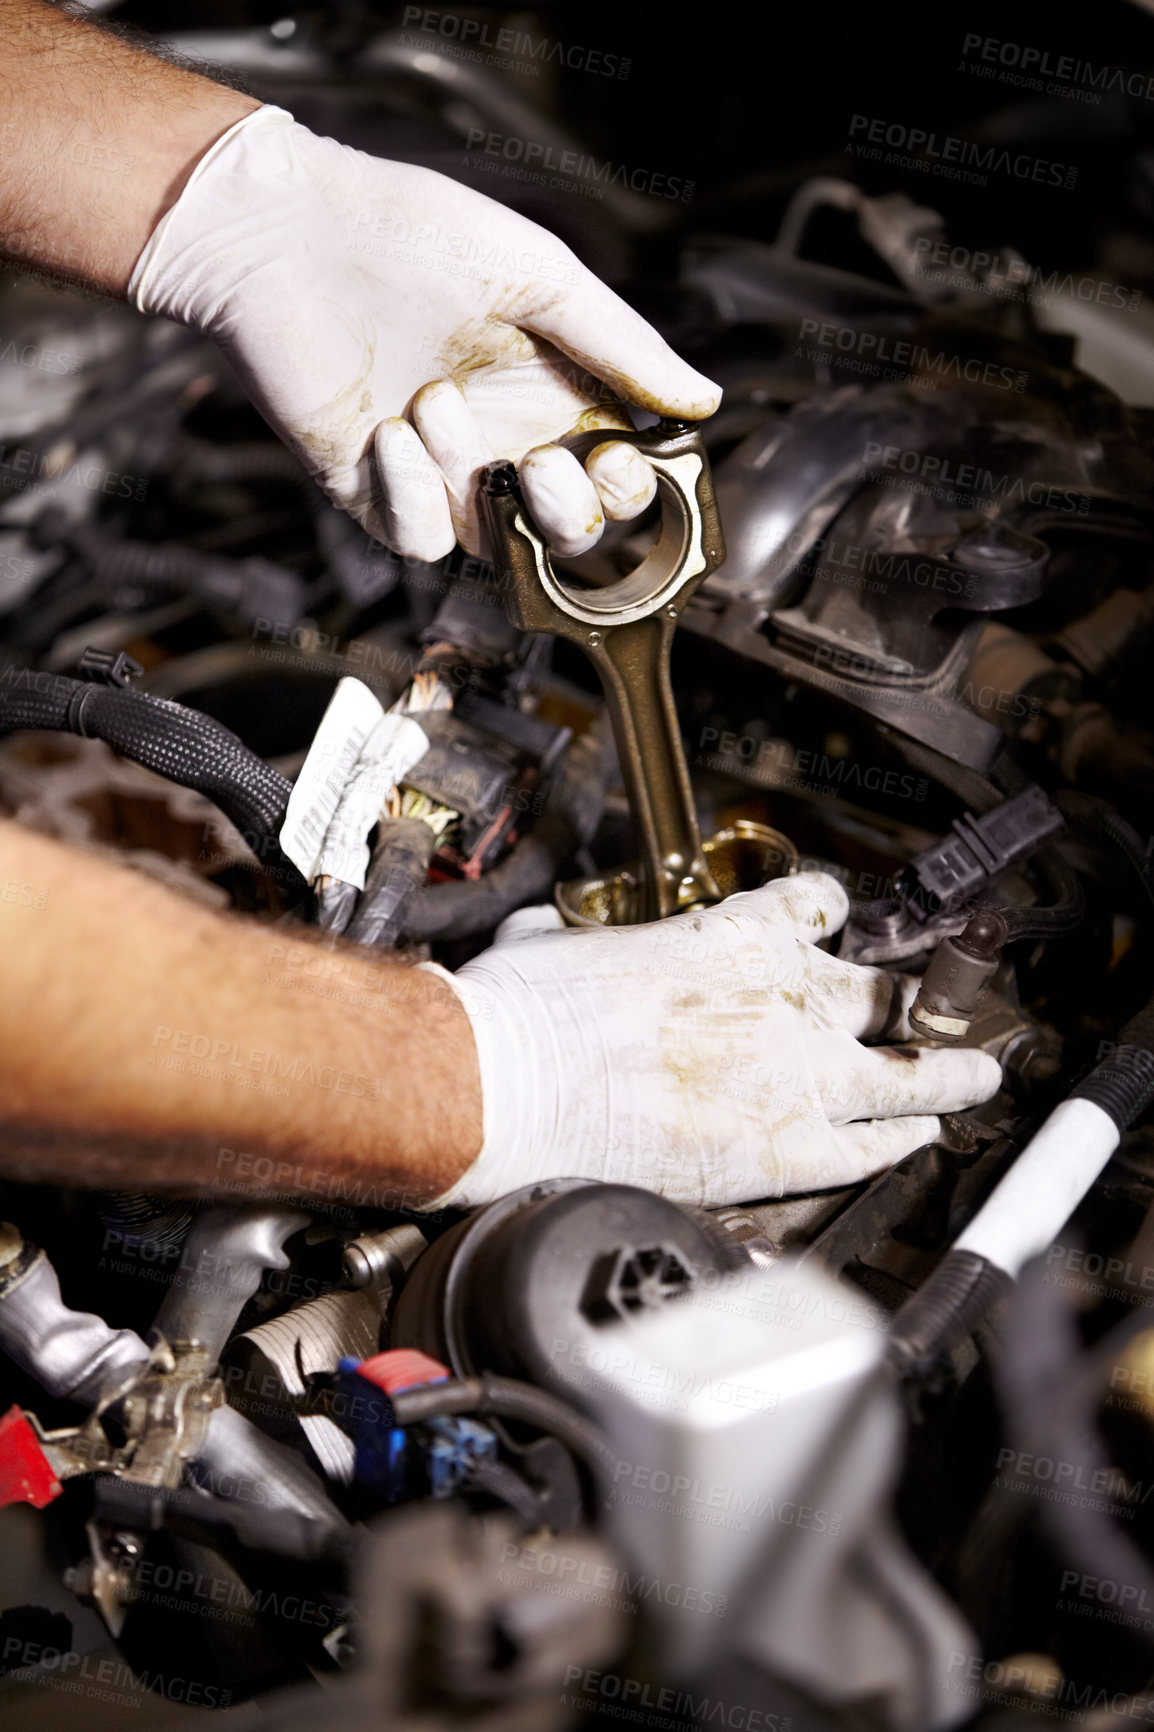 Buy stock photo Cropped image of a male mechanic's hands about to check the oil of a car